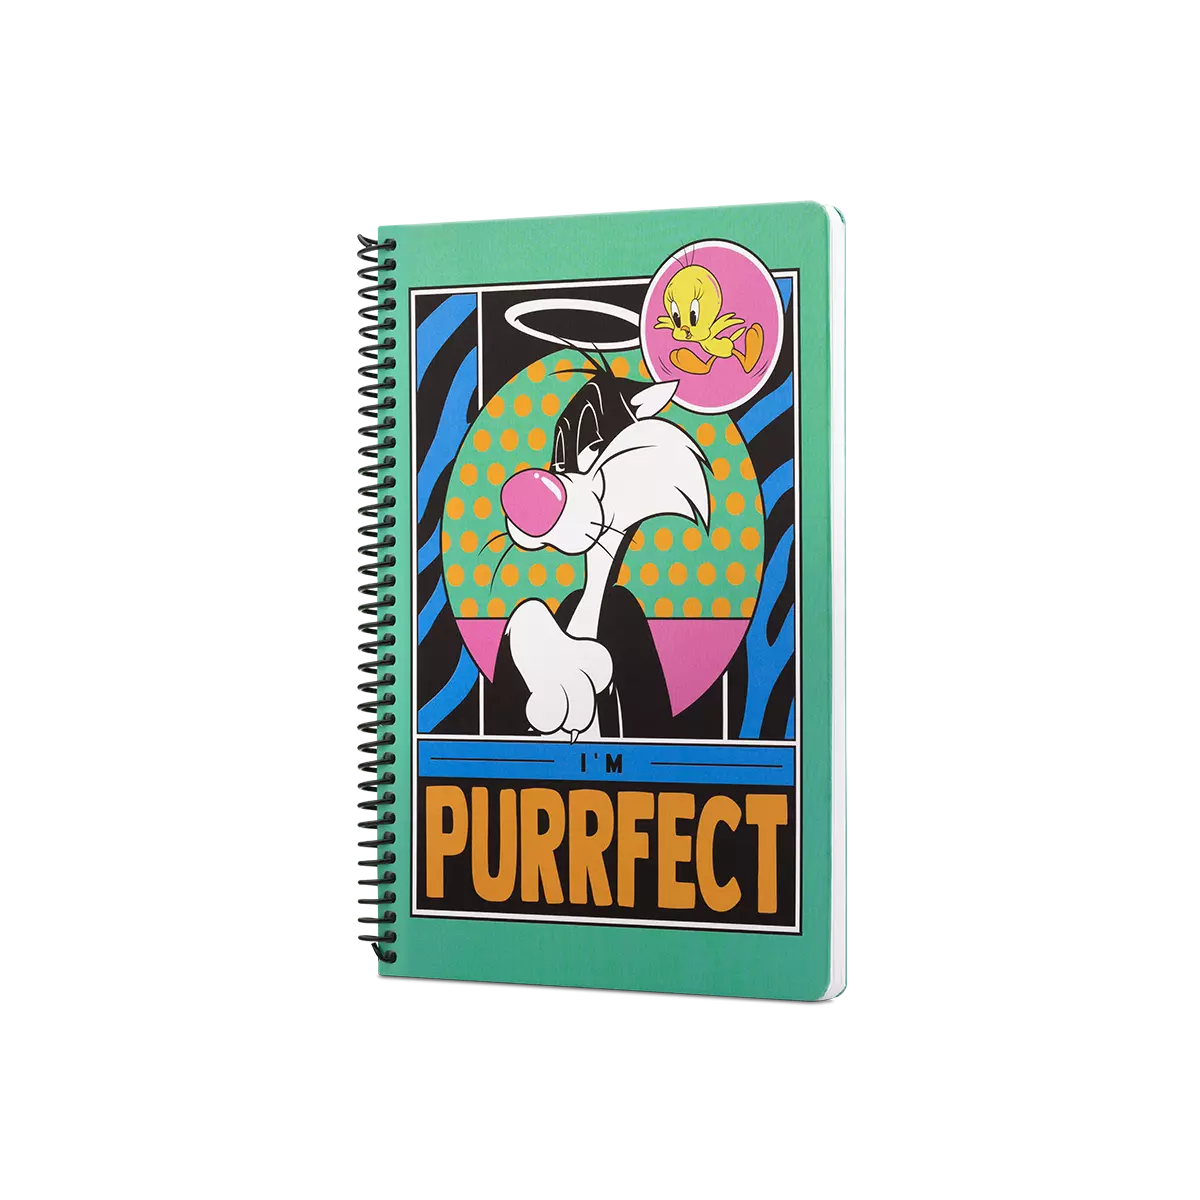 LOONEY TUNES IM PERRFECT SPIRALLI DEFTER YESIL - Thumbnail